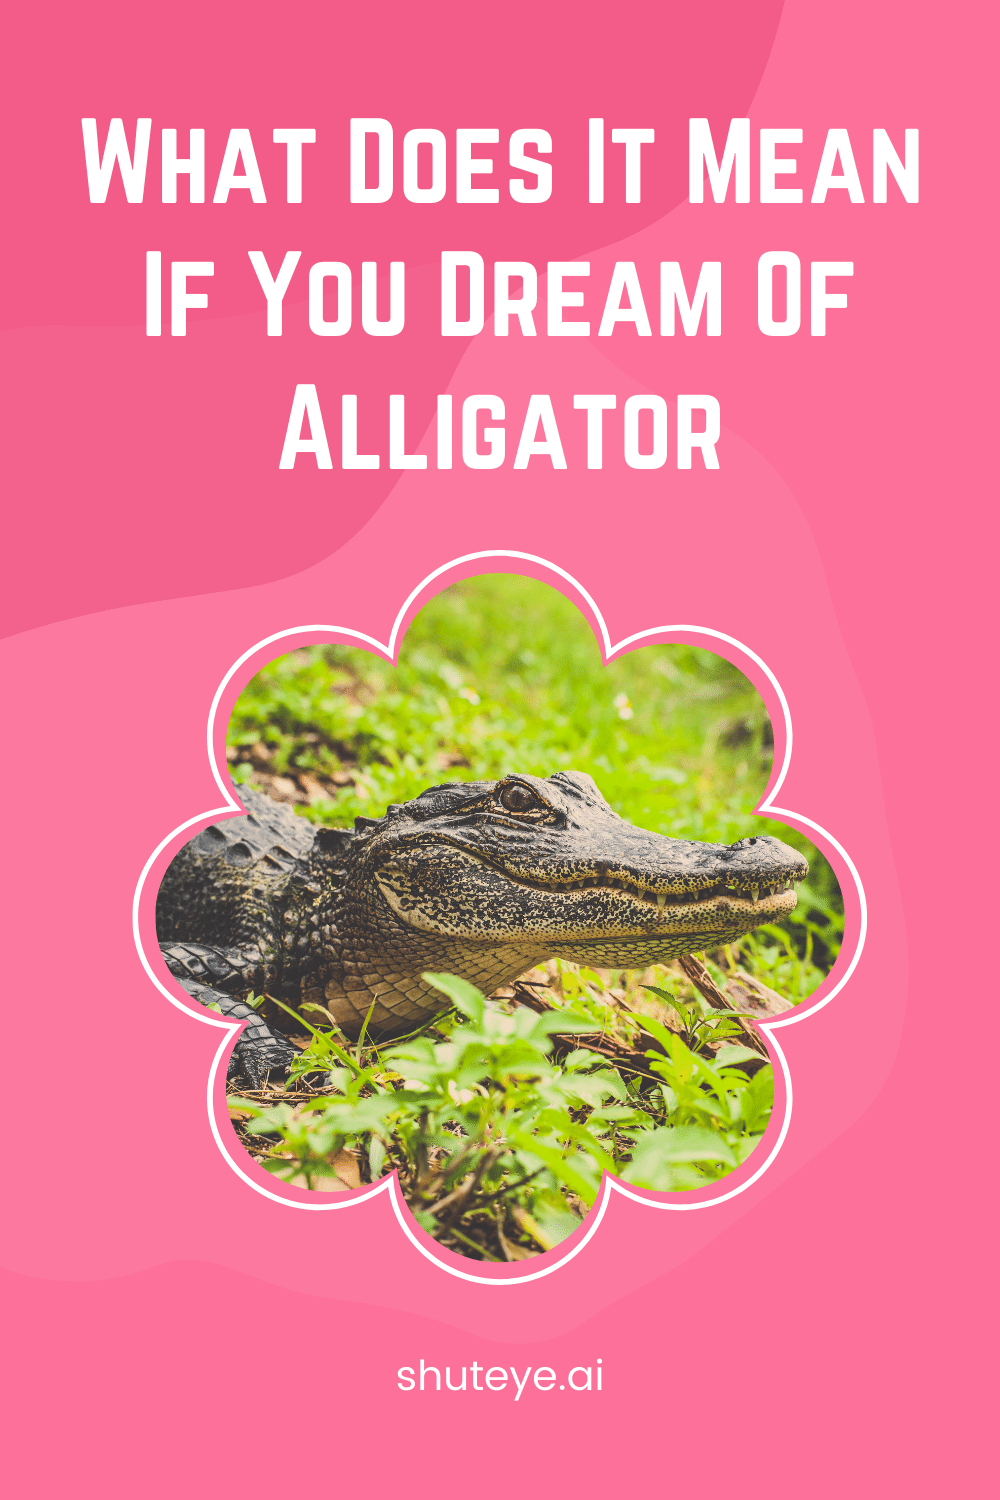 What does it mean if you dream of alligator